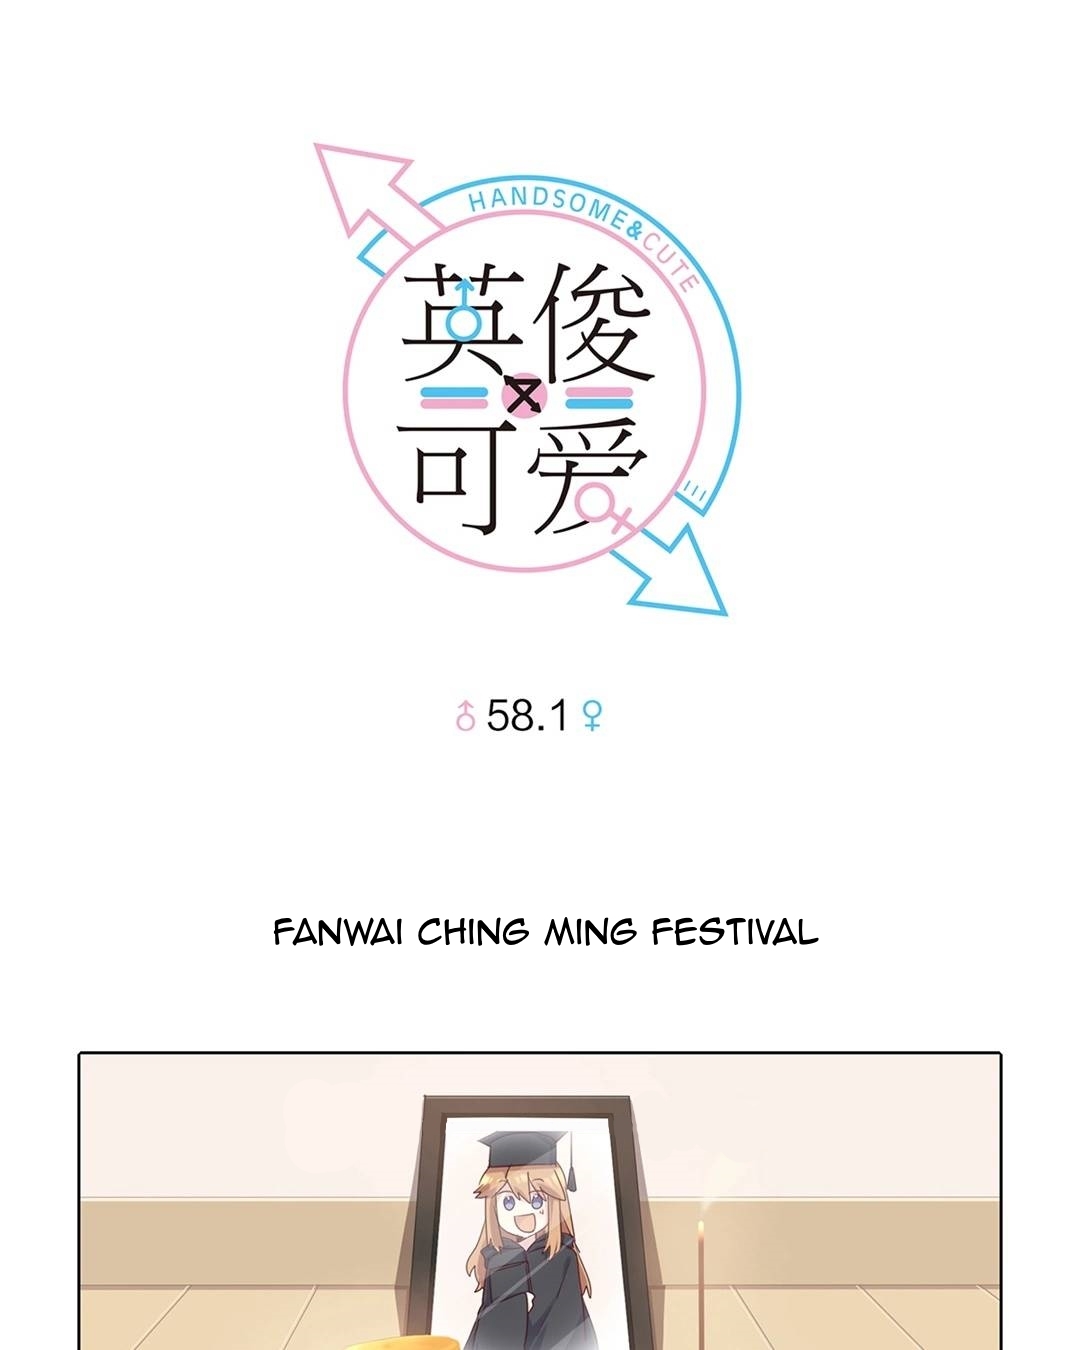 Handsome and Cute Ch. 58.1 Ancestor's day/Fanwai Ching Ming Festival